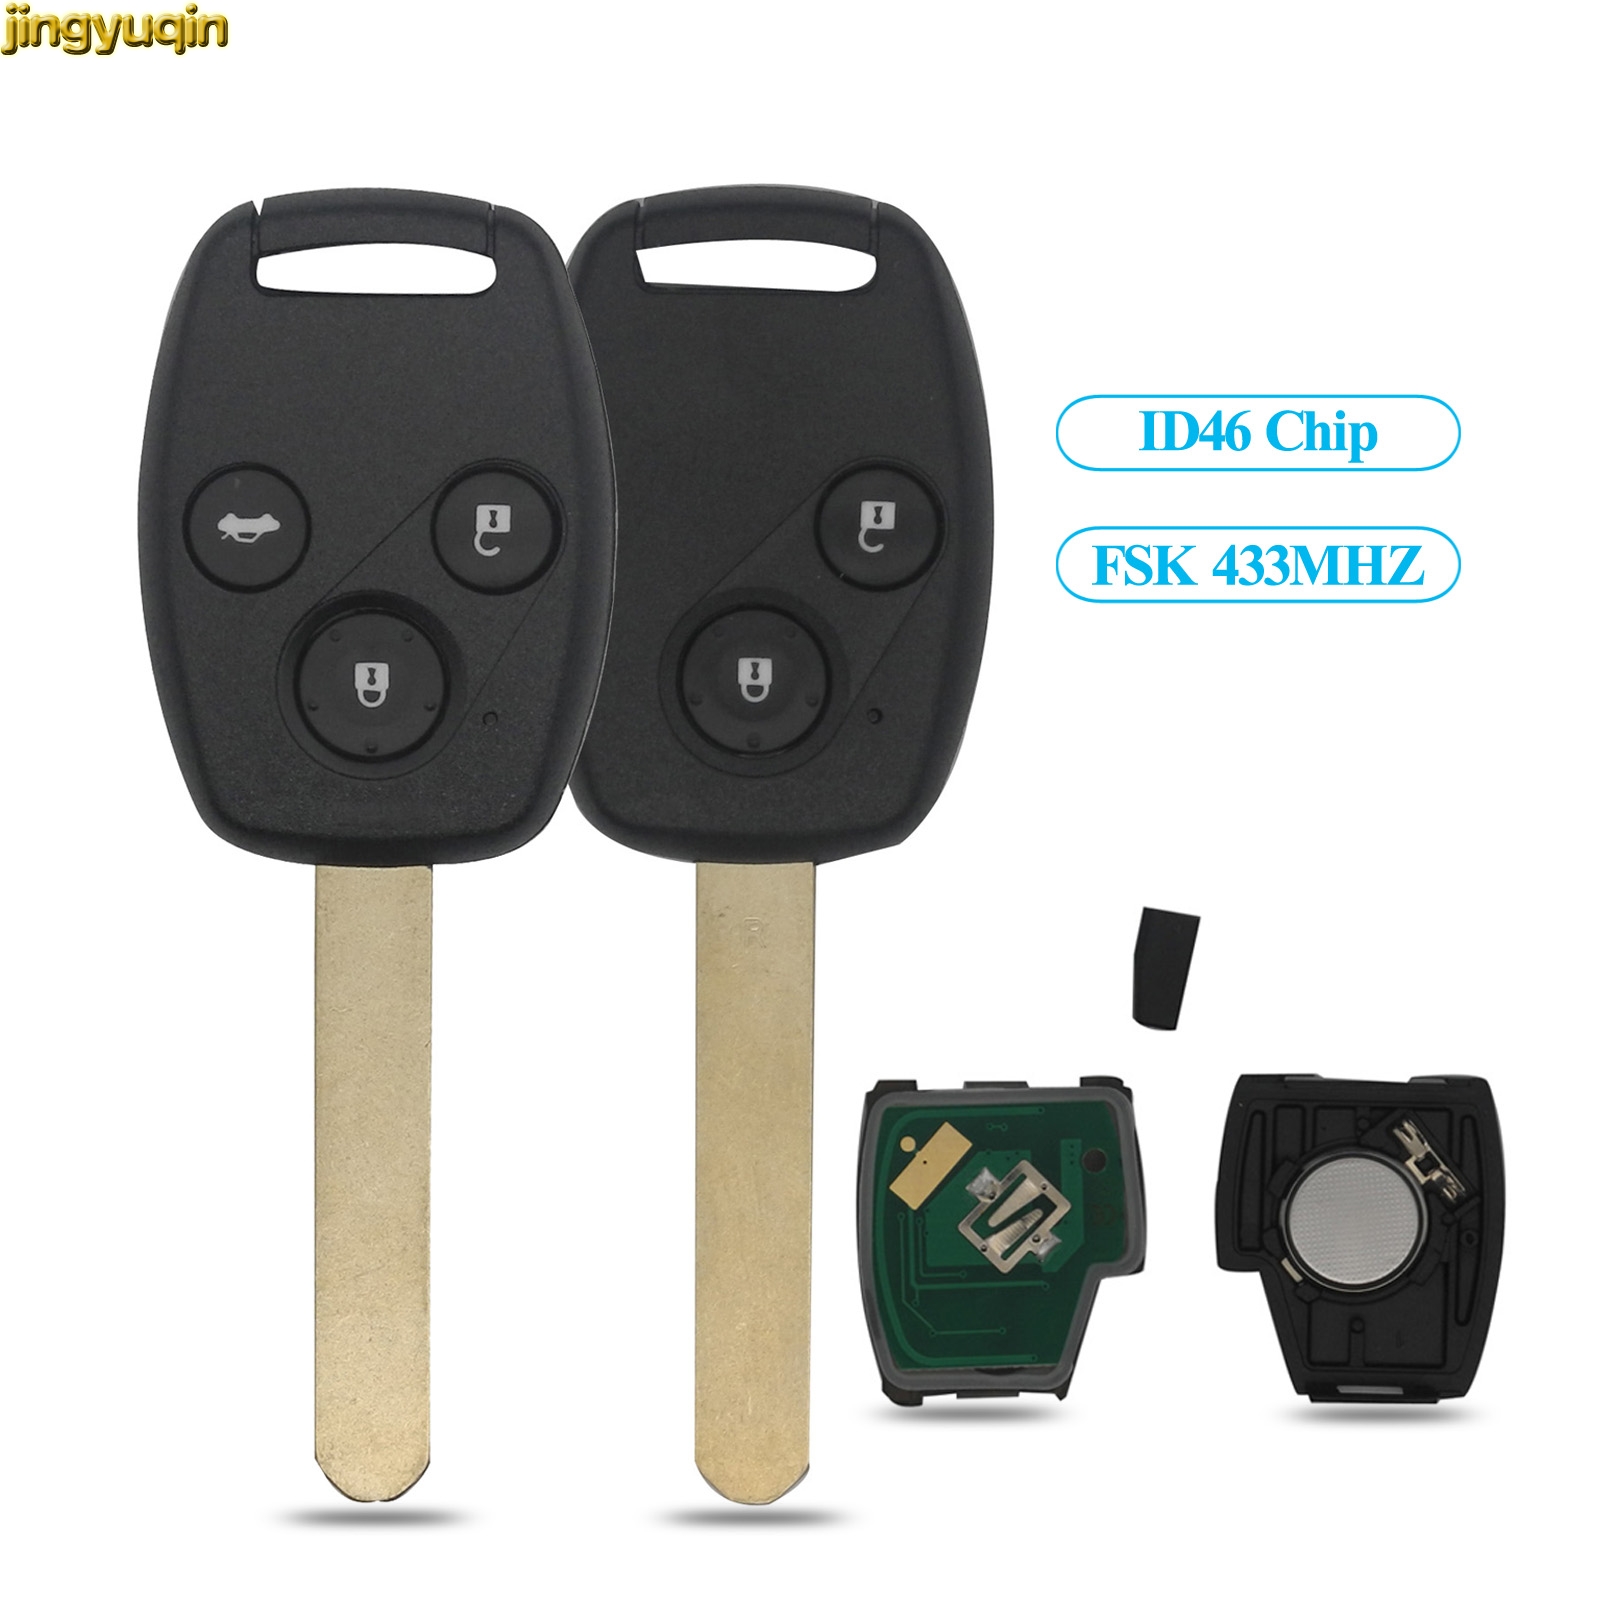 2 Button Replacement Car Remote Key Fob 433Mhz ID46 for Honda Civic CRV Jazz HRV 